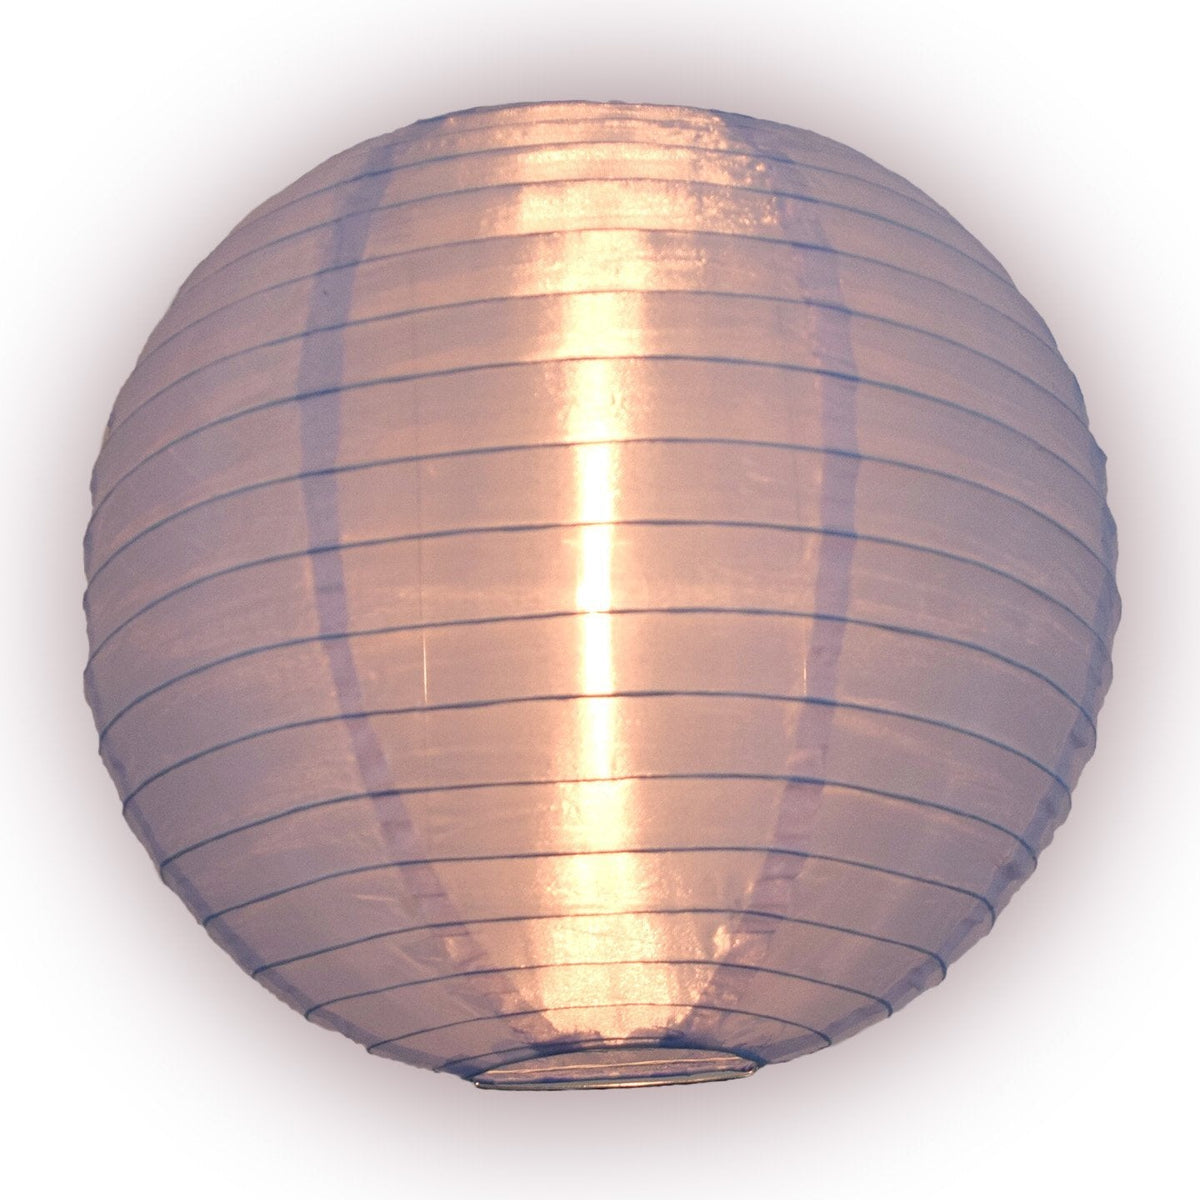 12" Shimmering Even Ribbing Nylon Lanterns - Door-2-Door - Various Colors Available (Master Case, 60-Day Processing)